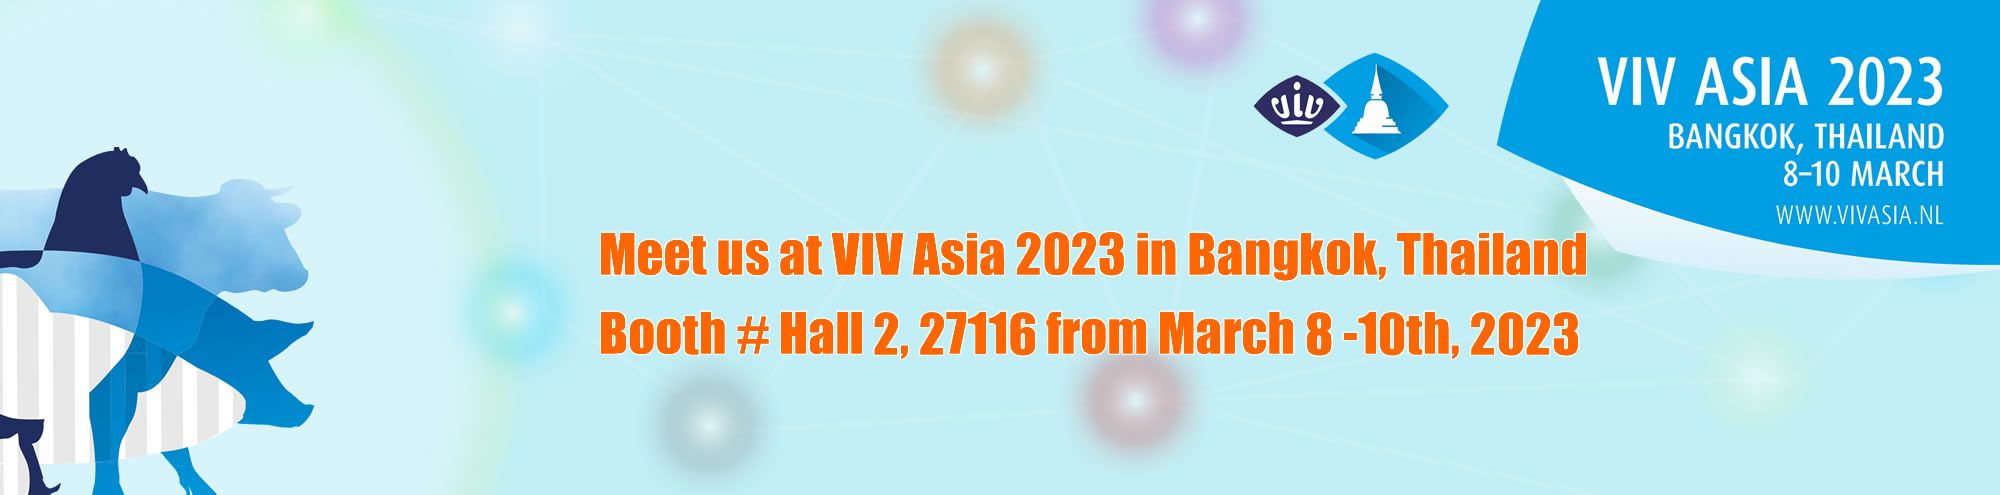 Meet us at VIV ASIA 2023 in Bangkok (Thailand) on March 8-10th